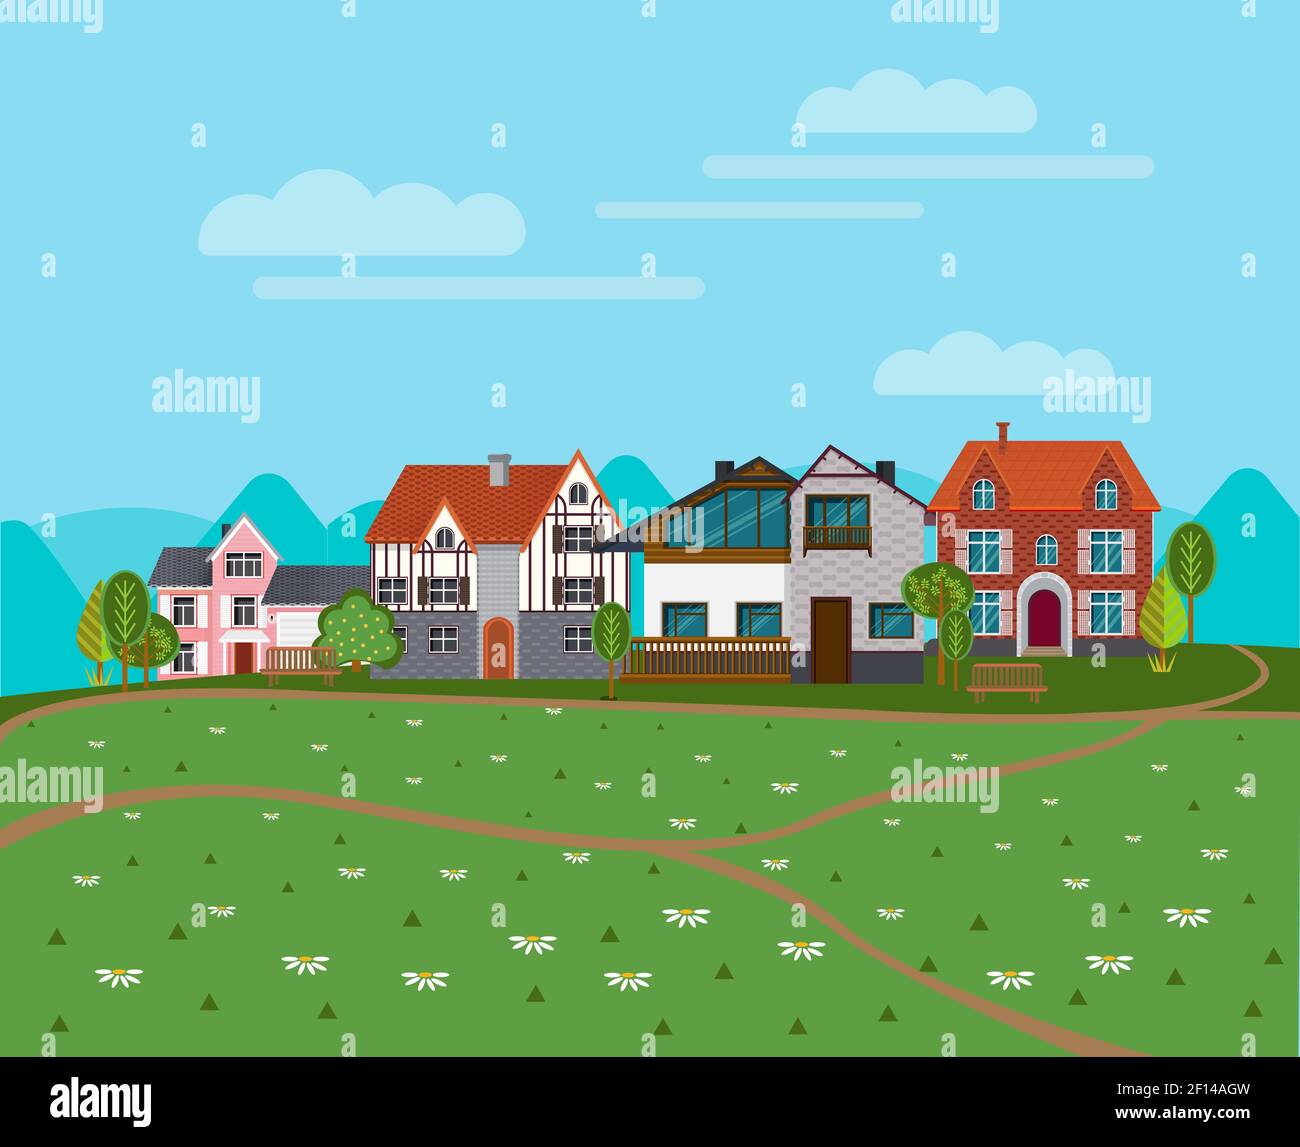 Summer rural landscape background with cottages suburban houses green trees and chamomile flowers vector illustration Stock Vector